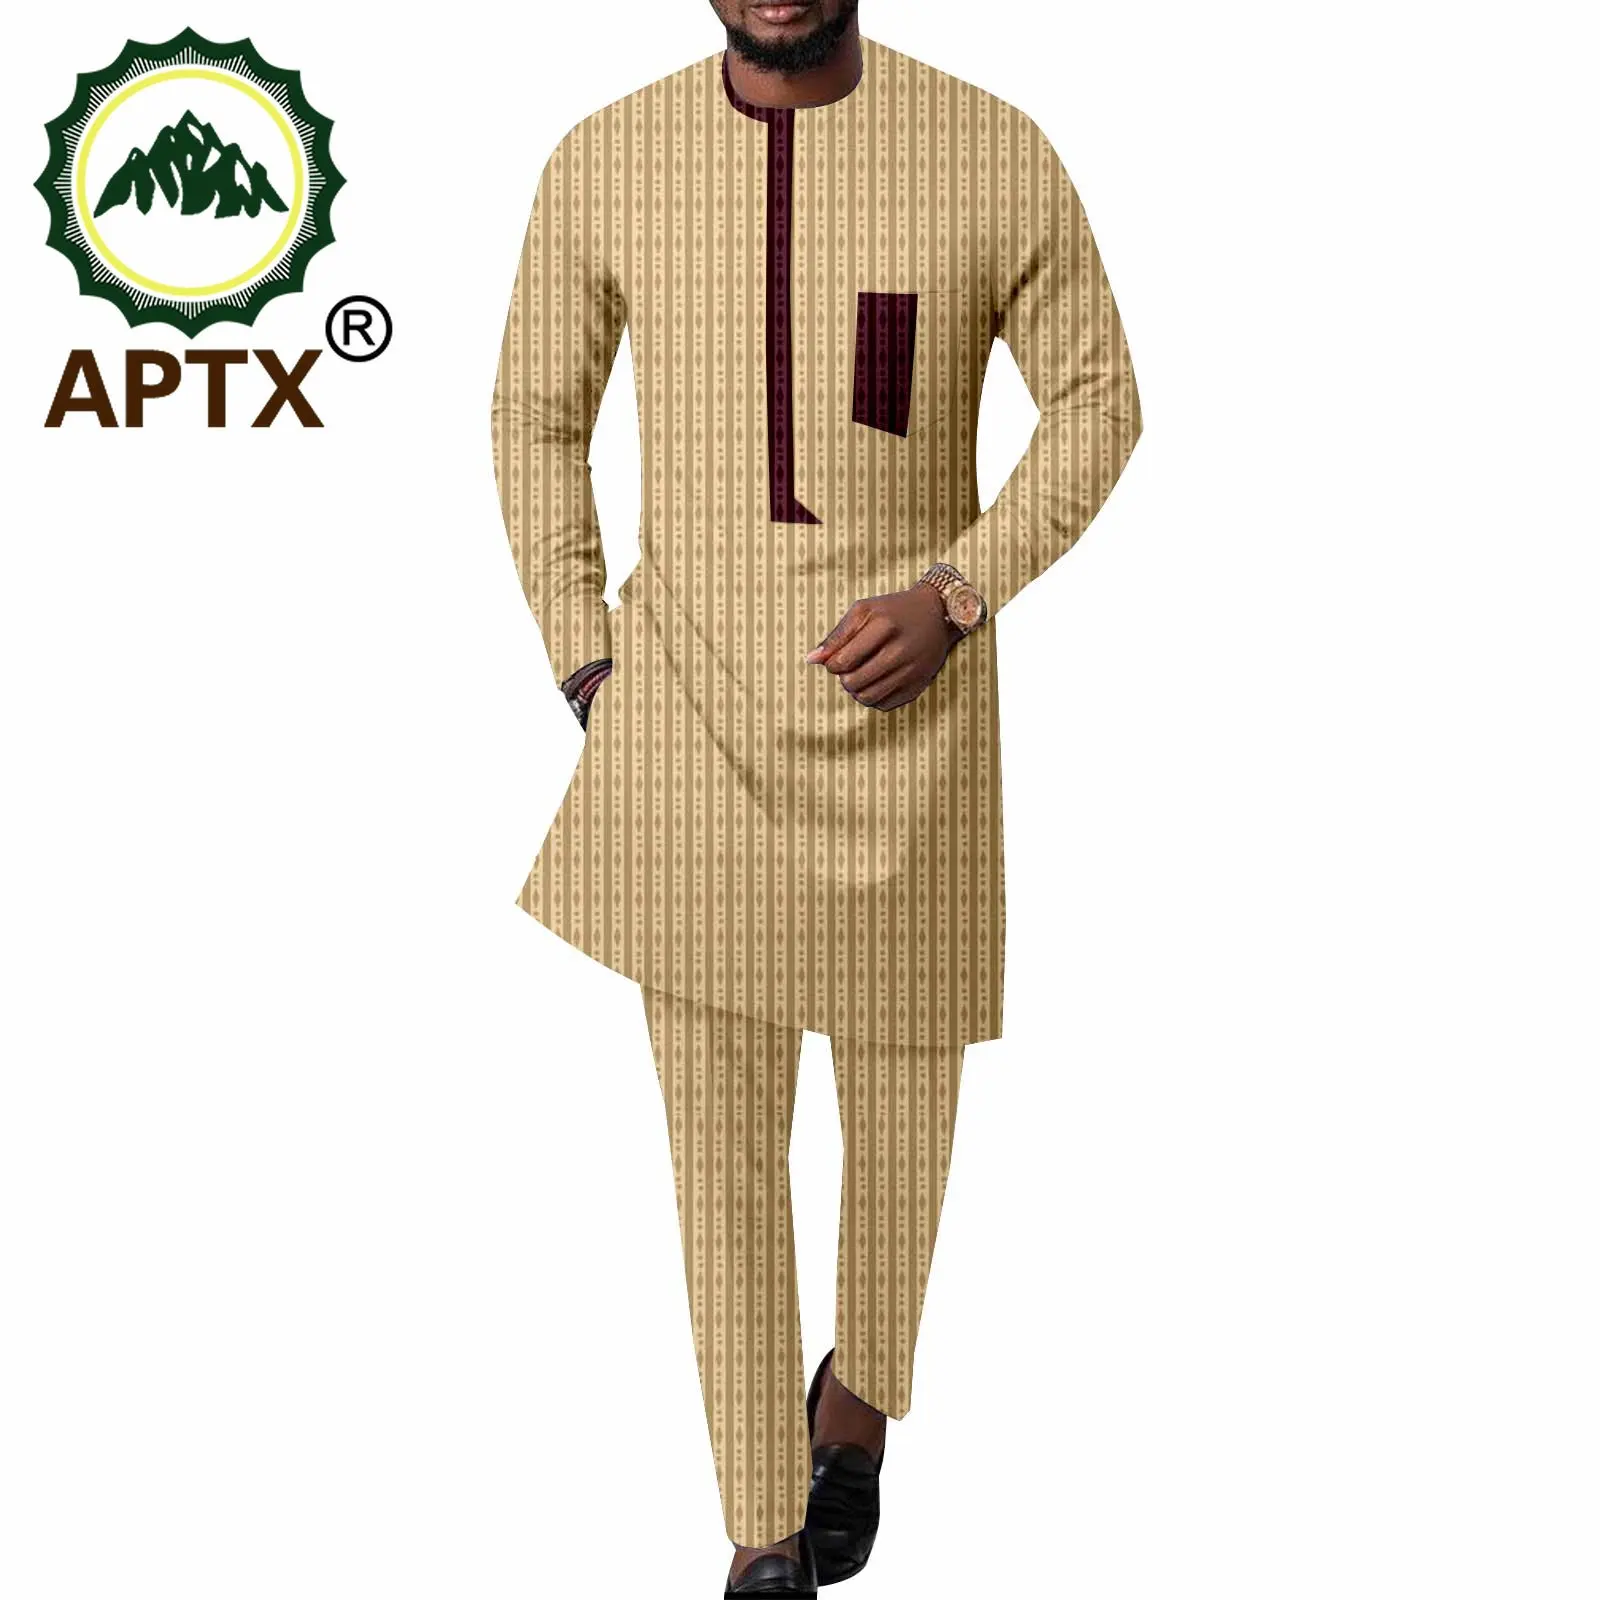 APTX African Men's Clothing 2 Pieces Set Casual Suit Long O-Neck Top Shirt Full Length Slim Pants Daily Causal Wear A2316001